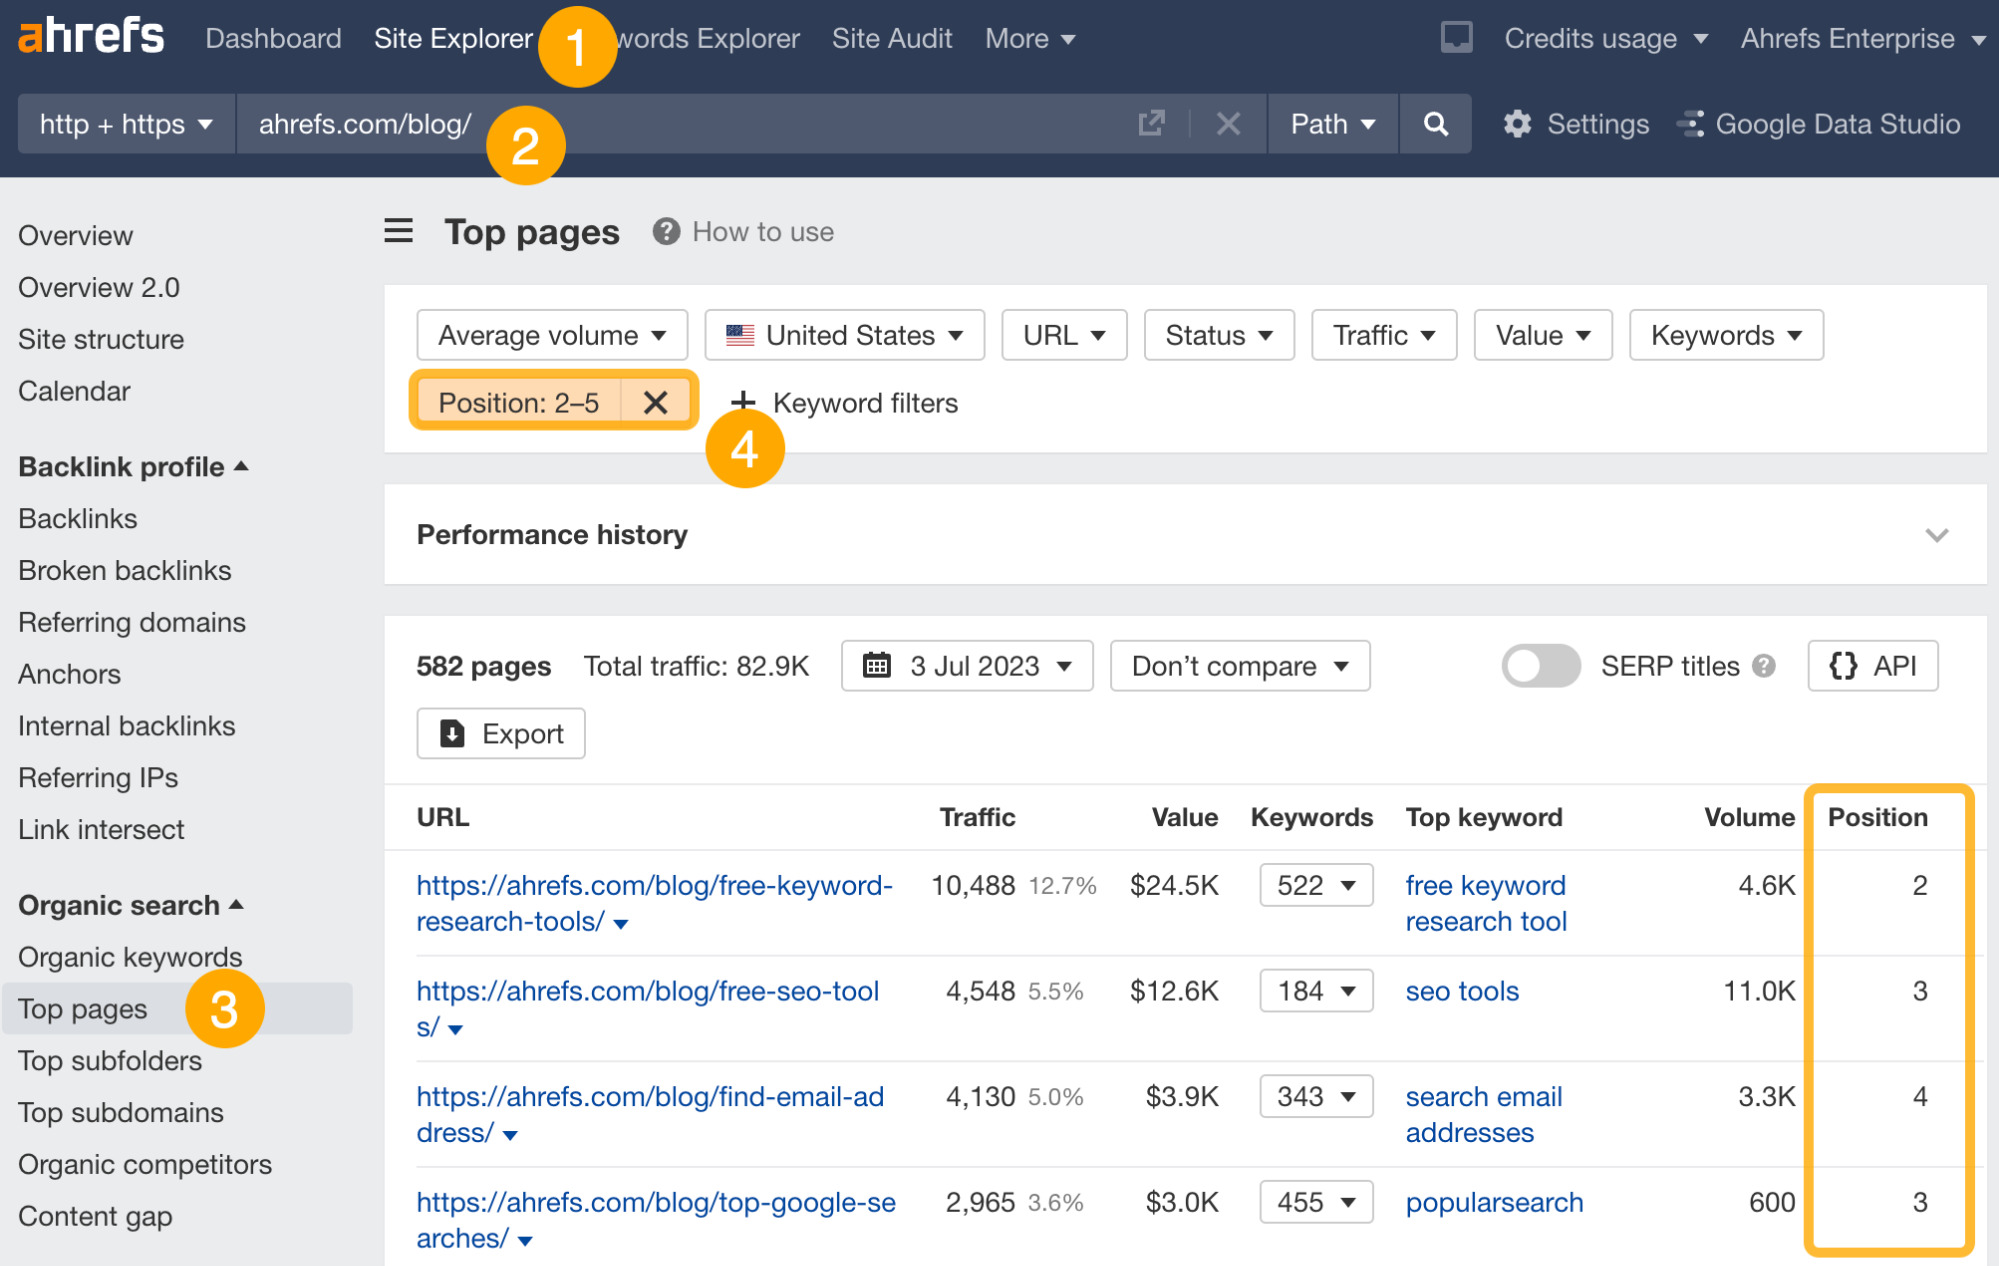 Finding pages to optimize title tags, via Ahrefs' Site Explorer
